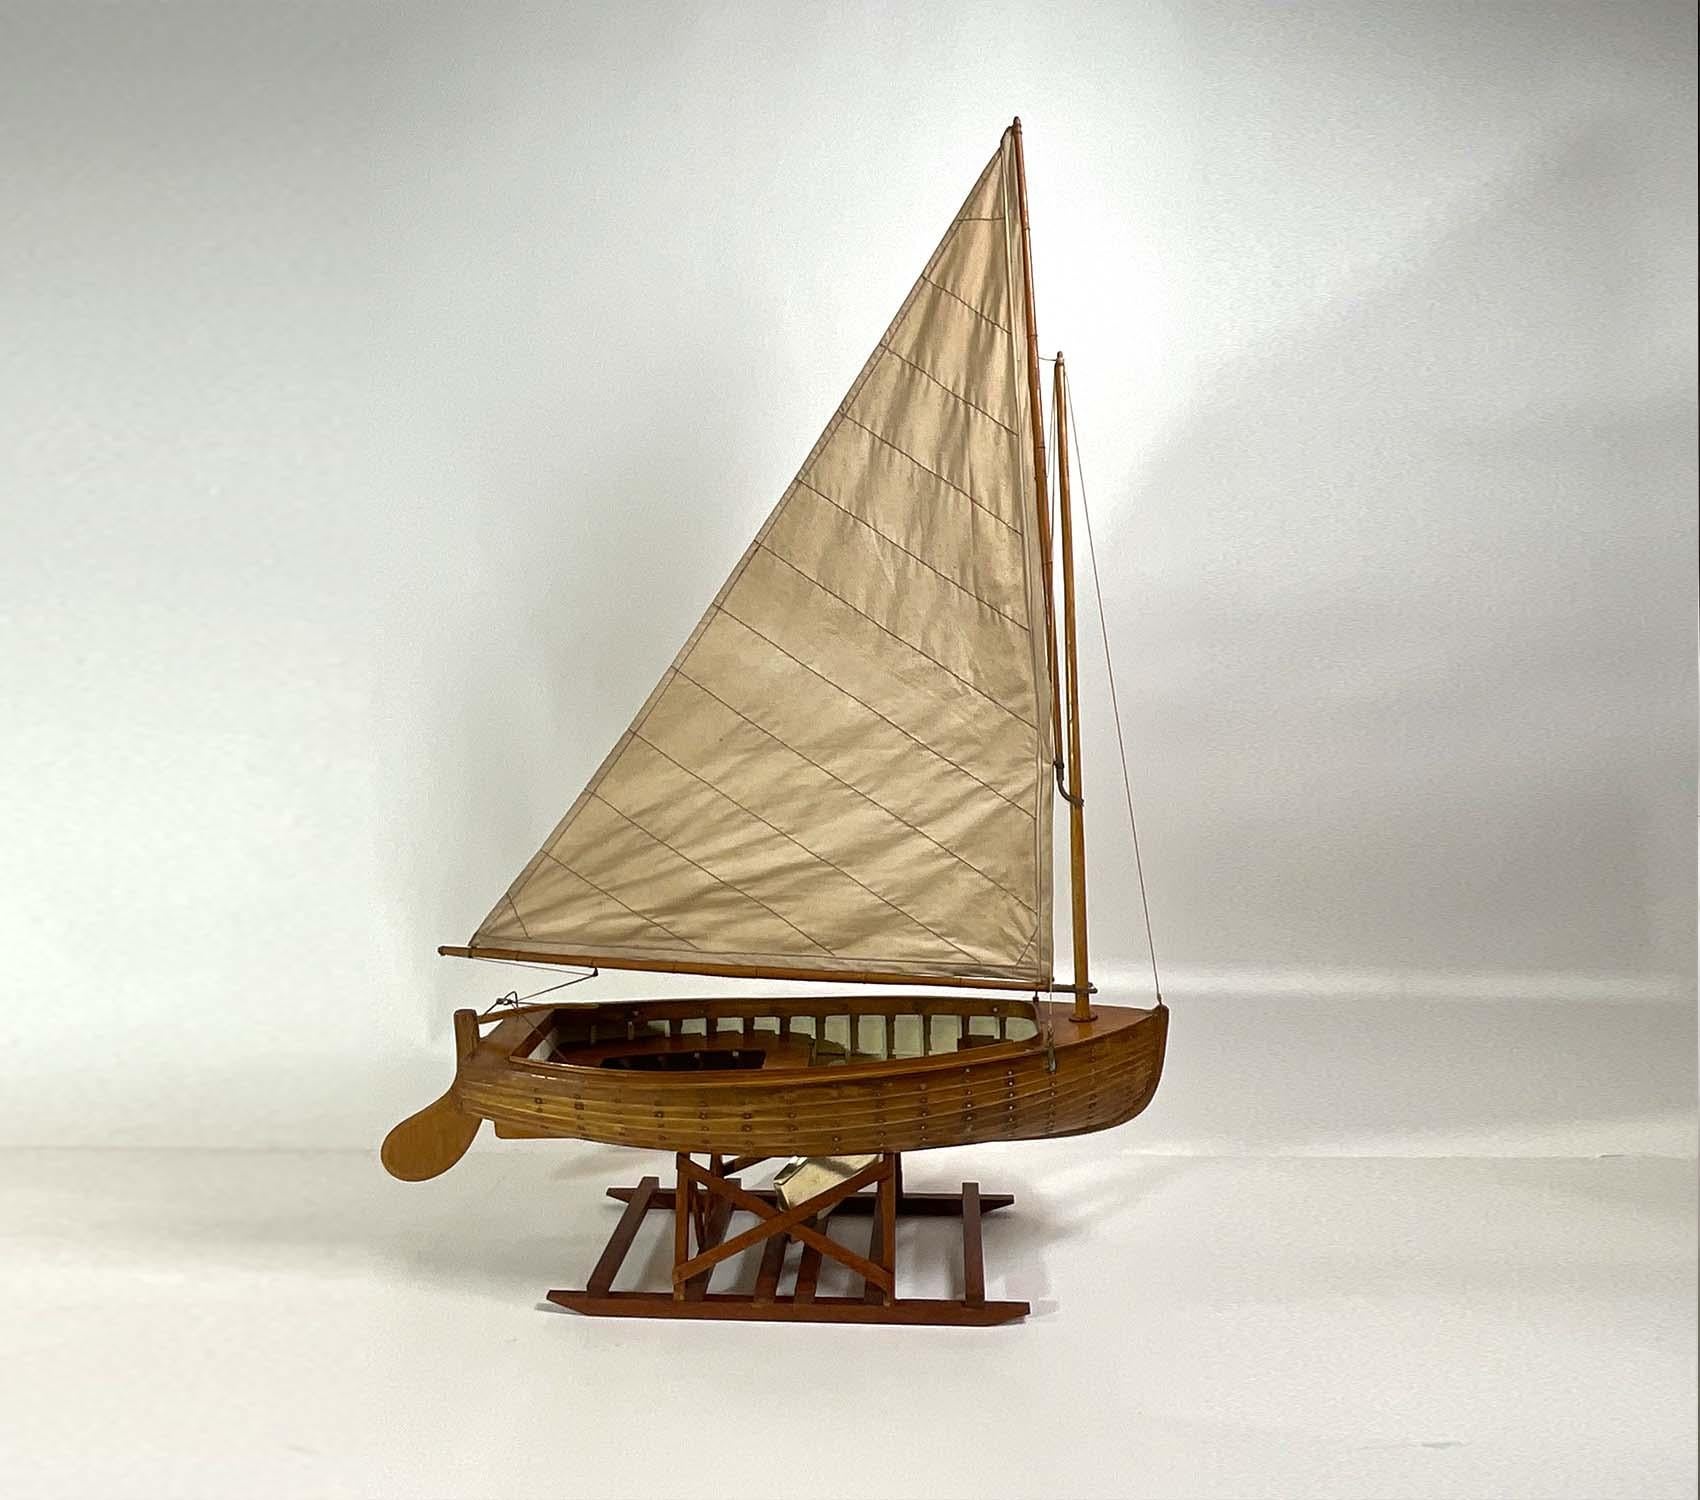 Exceptional boat model of a Lapstrake sloop. The hull is fitted with ribs, dropped brass centerboard, floorboards, rudder with tiller. Expertly crafted. Set onto a quality cradle mount. Circa 1935. Top notch craftsmanship. Look closely and zoom in